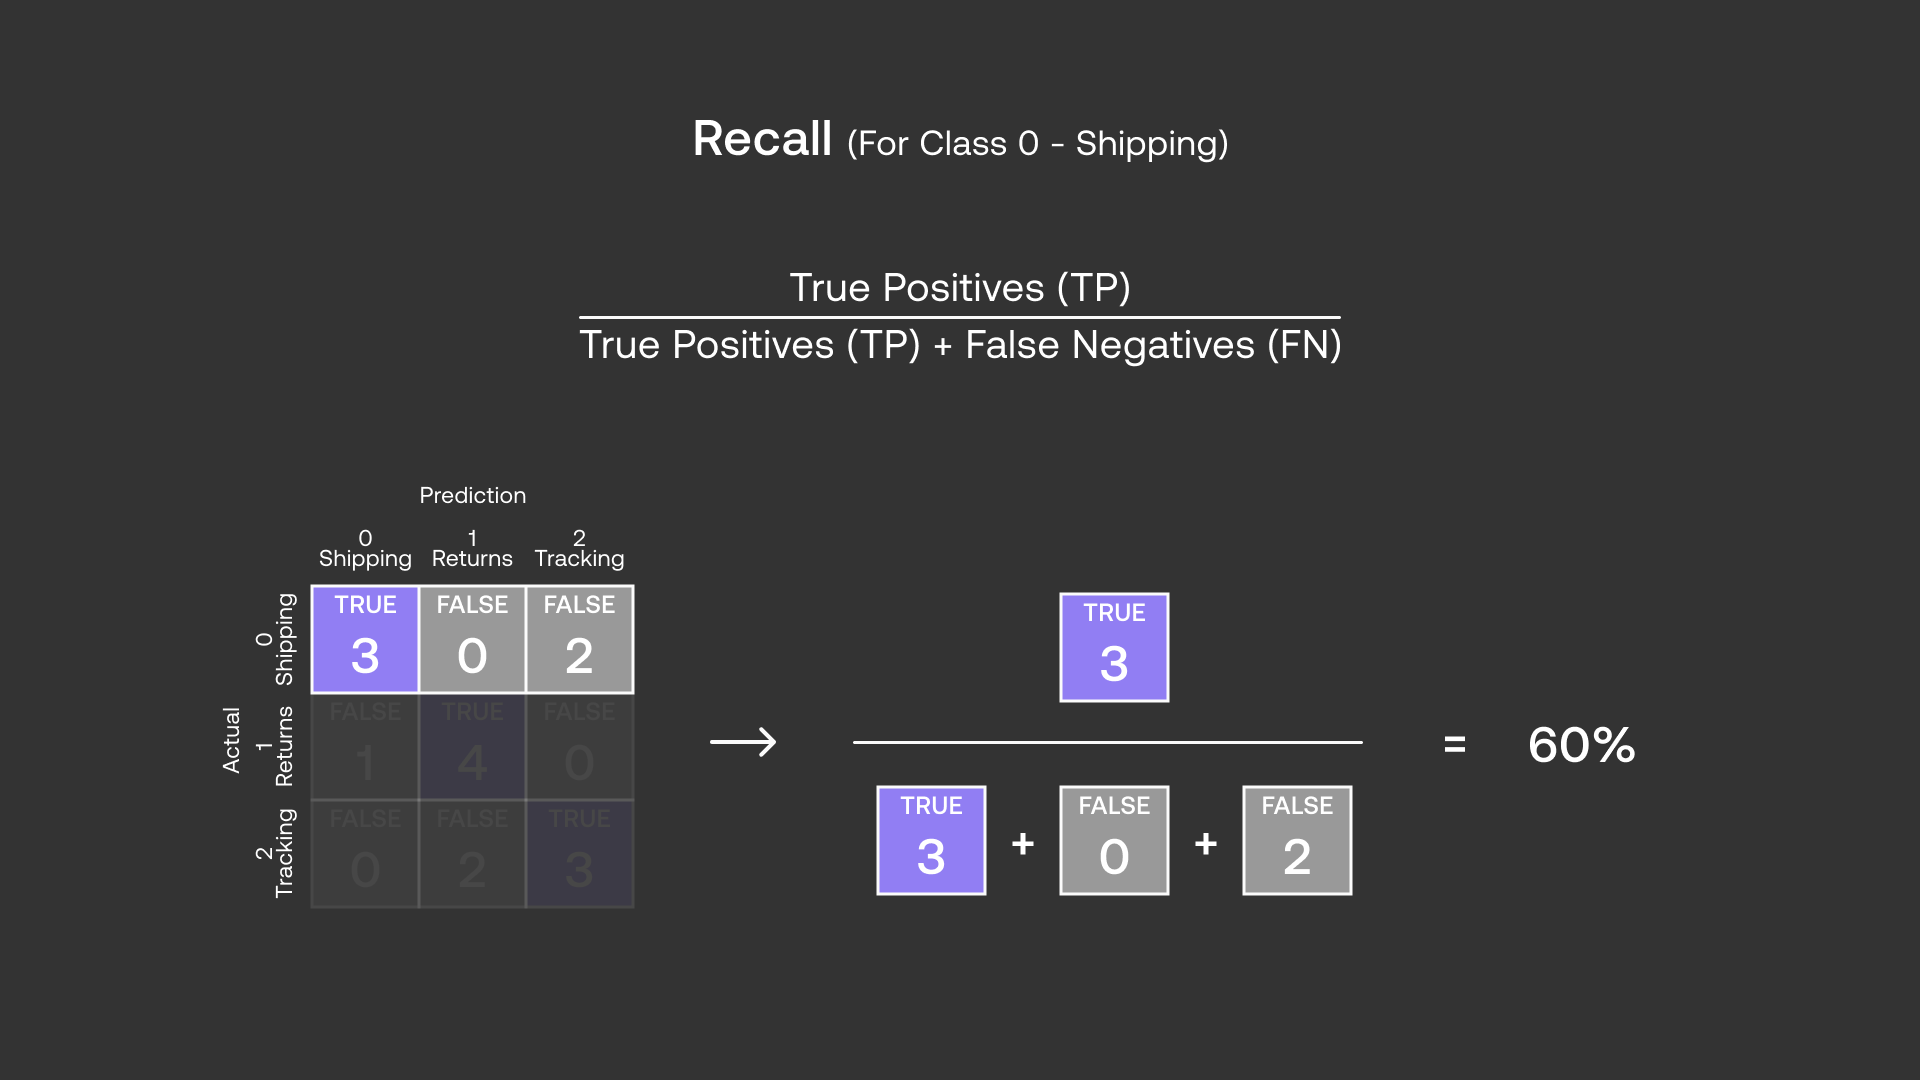 Recall calculation for class 0 - Shipping